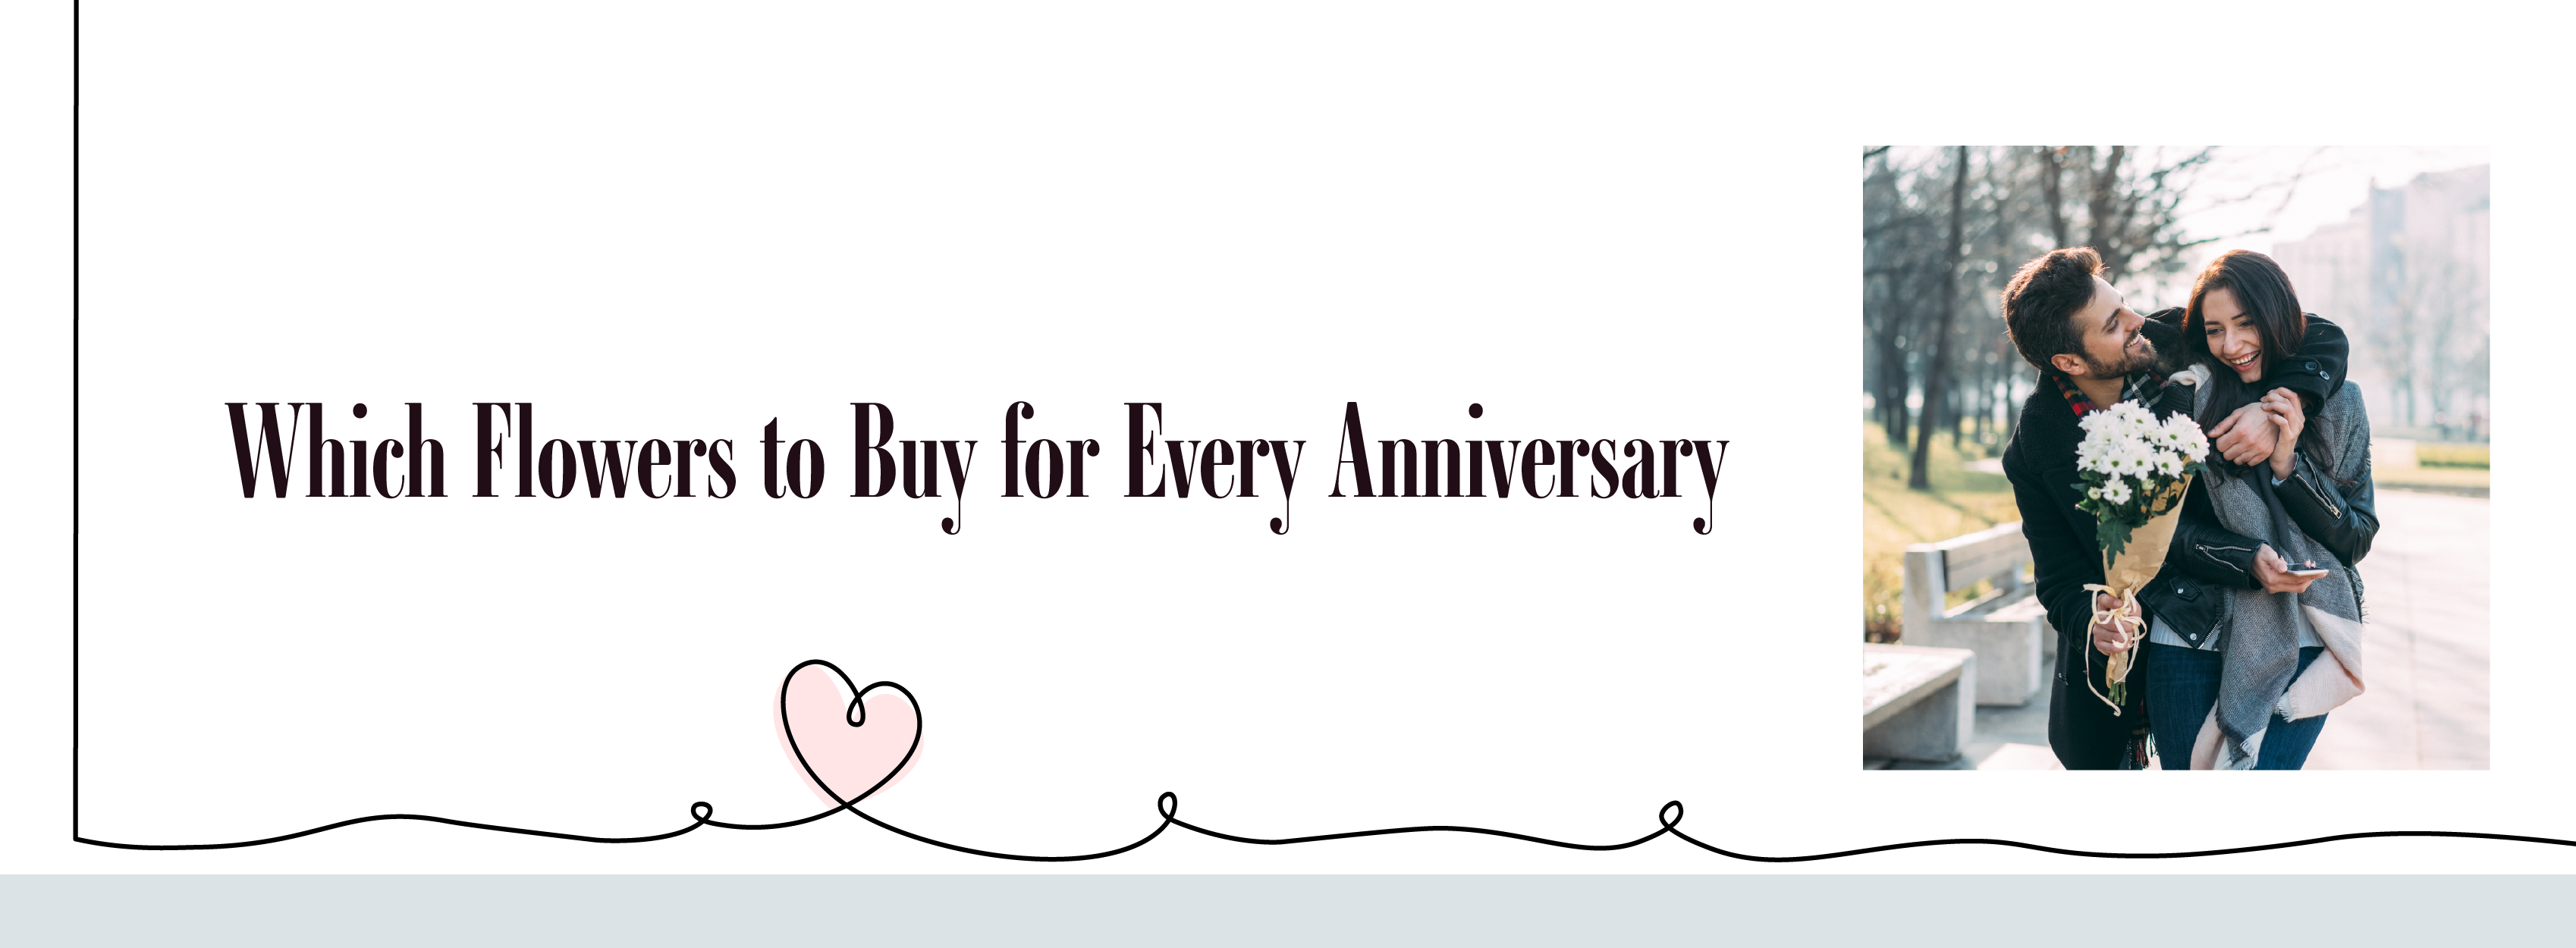 Which flowers to buy for your anniversary